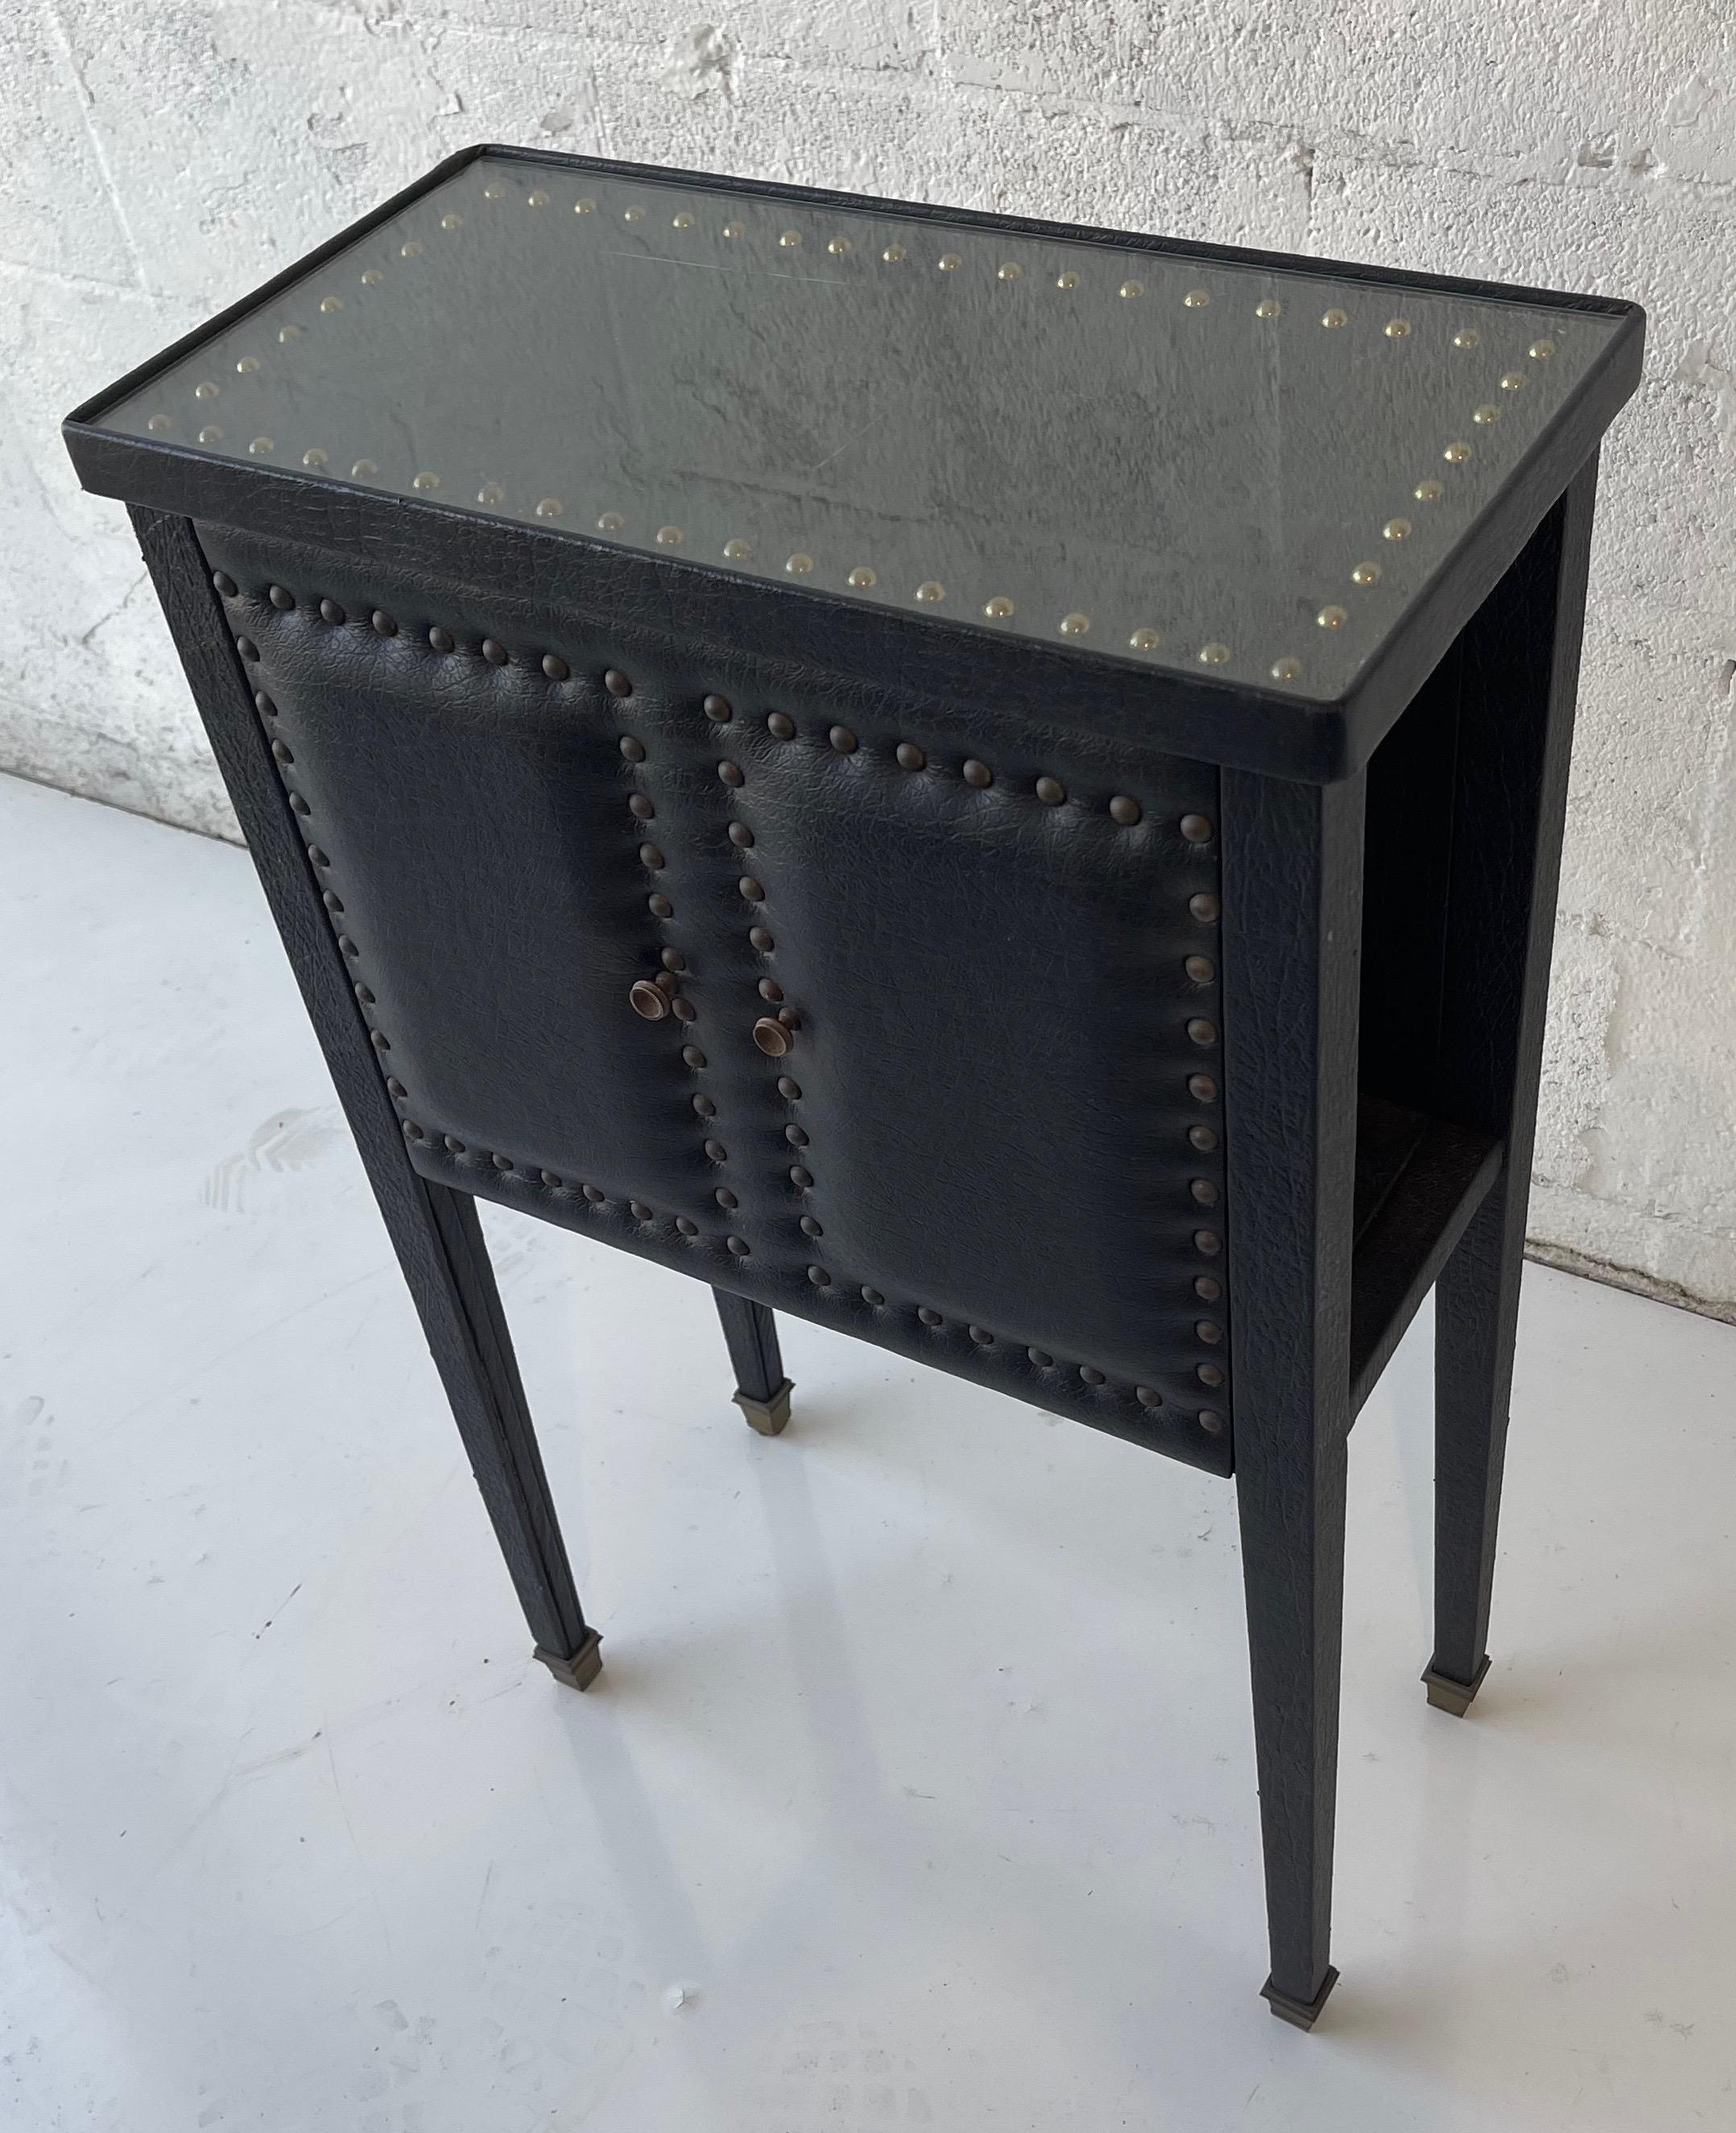 Jacques Adnet Style French faux leather side table, circa 1950.
Fake door, all faces faux leather finished.